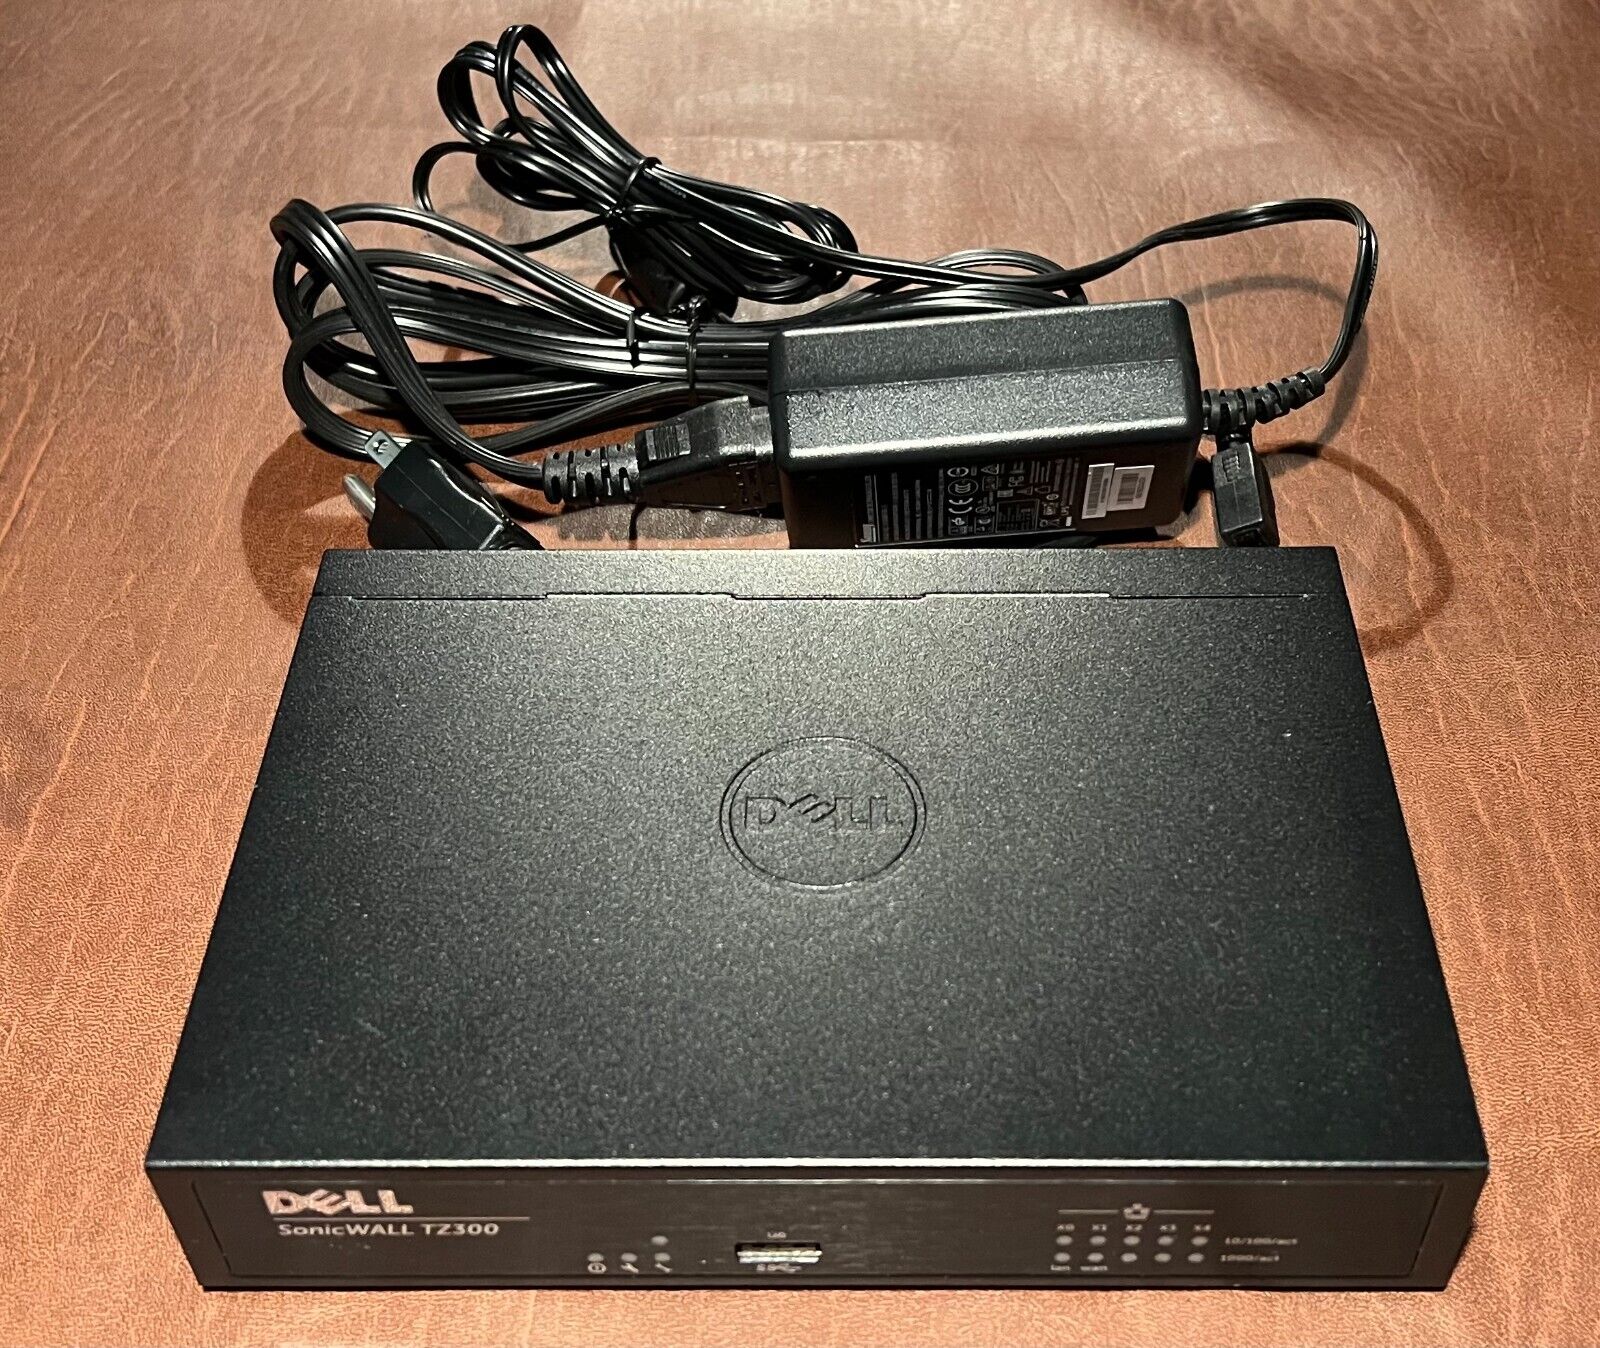 Dell SonicWall TZ300 5-Port Network Security Firewall Appliance APL28-0B4